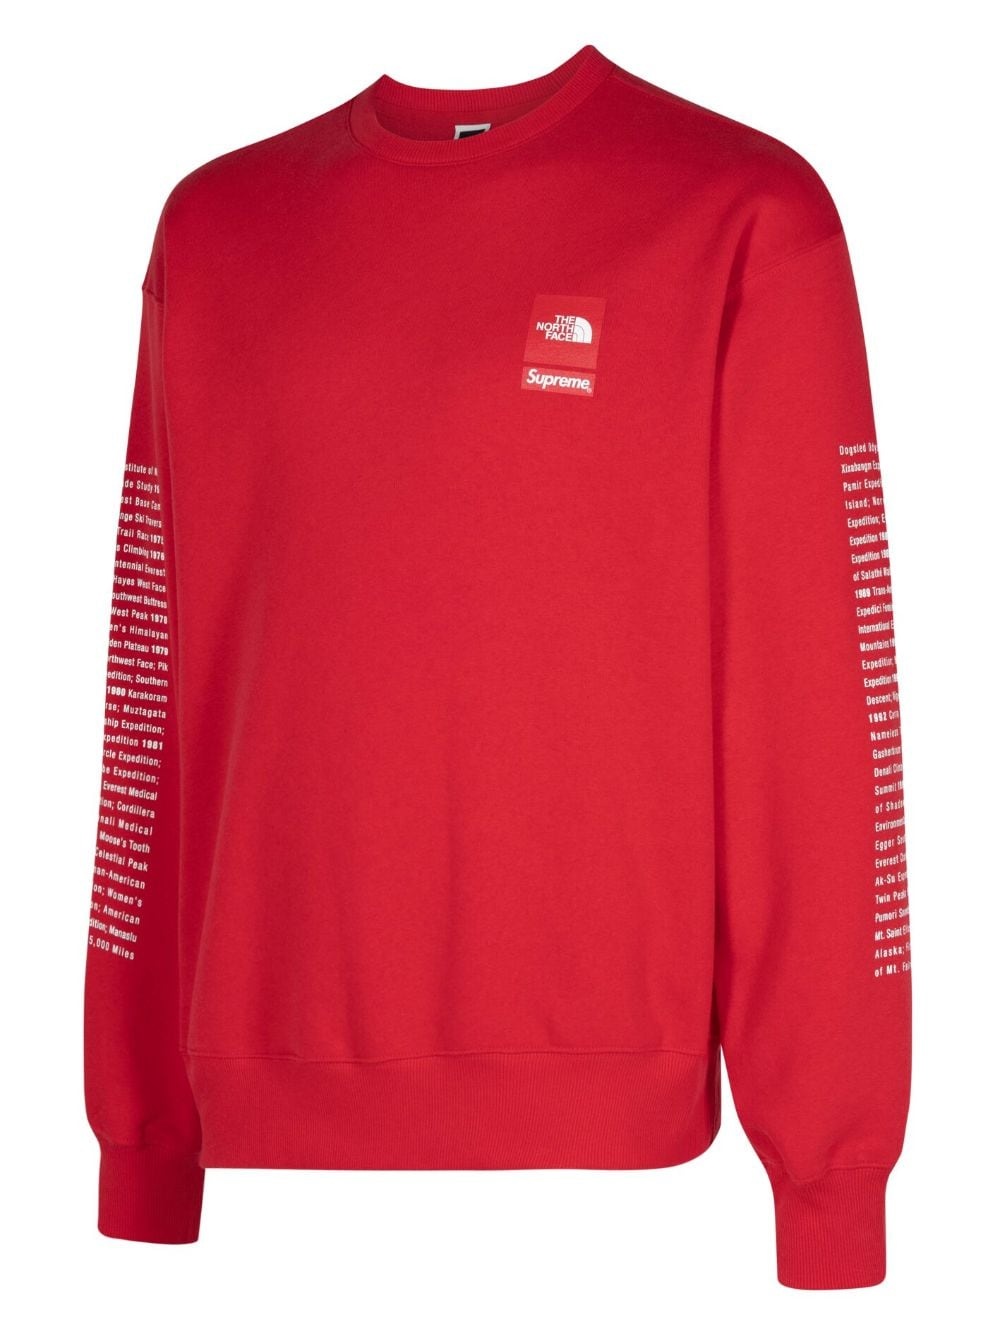 x The North Face "Red" sweatshirt - 2